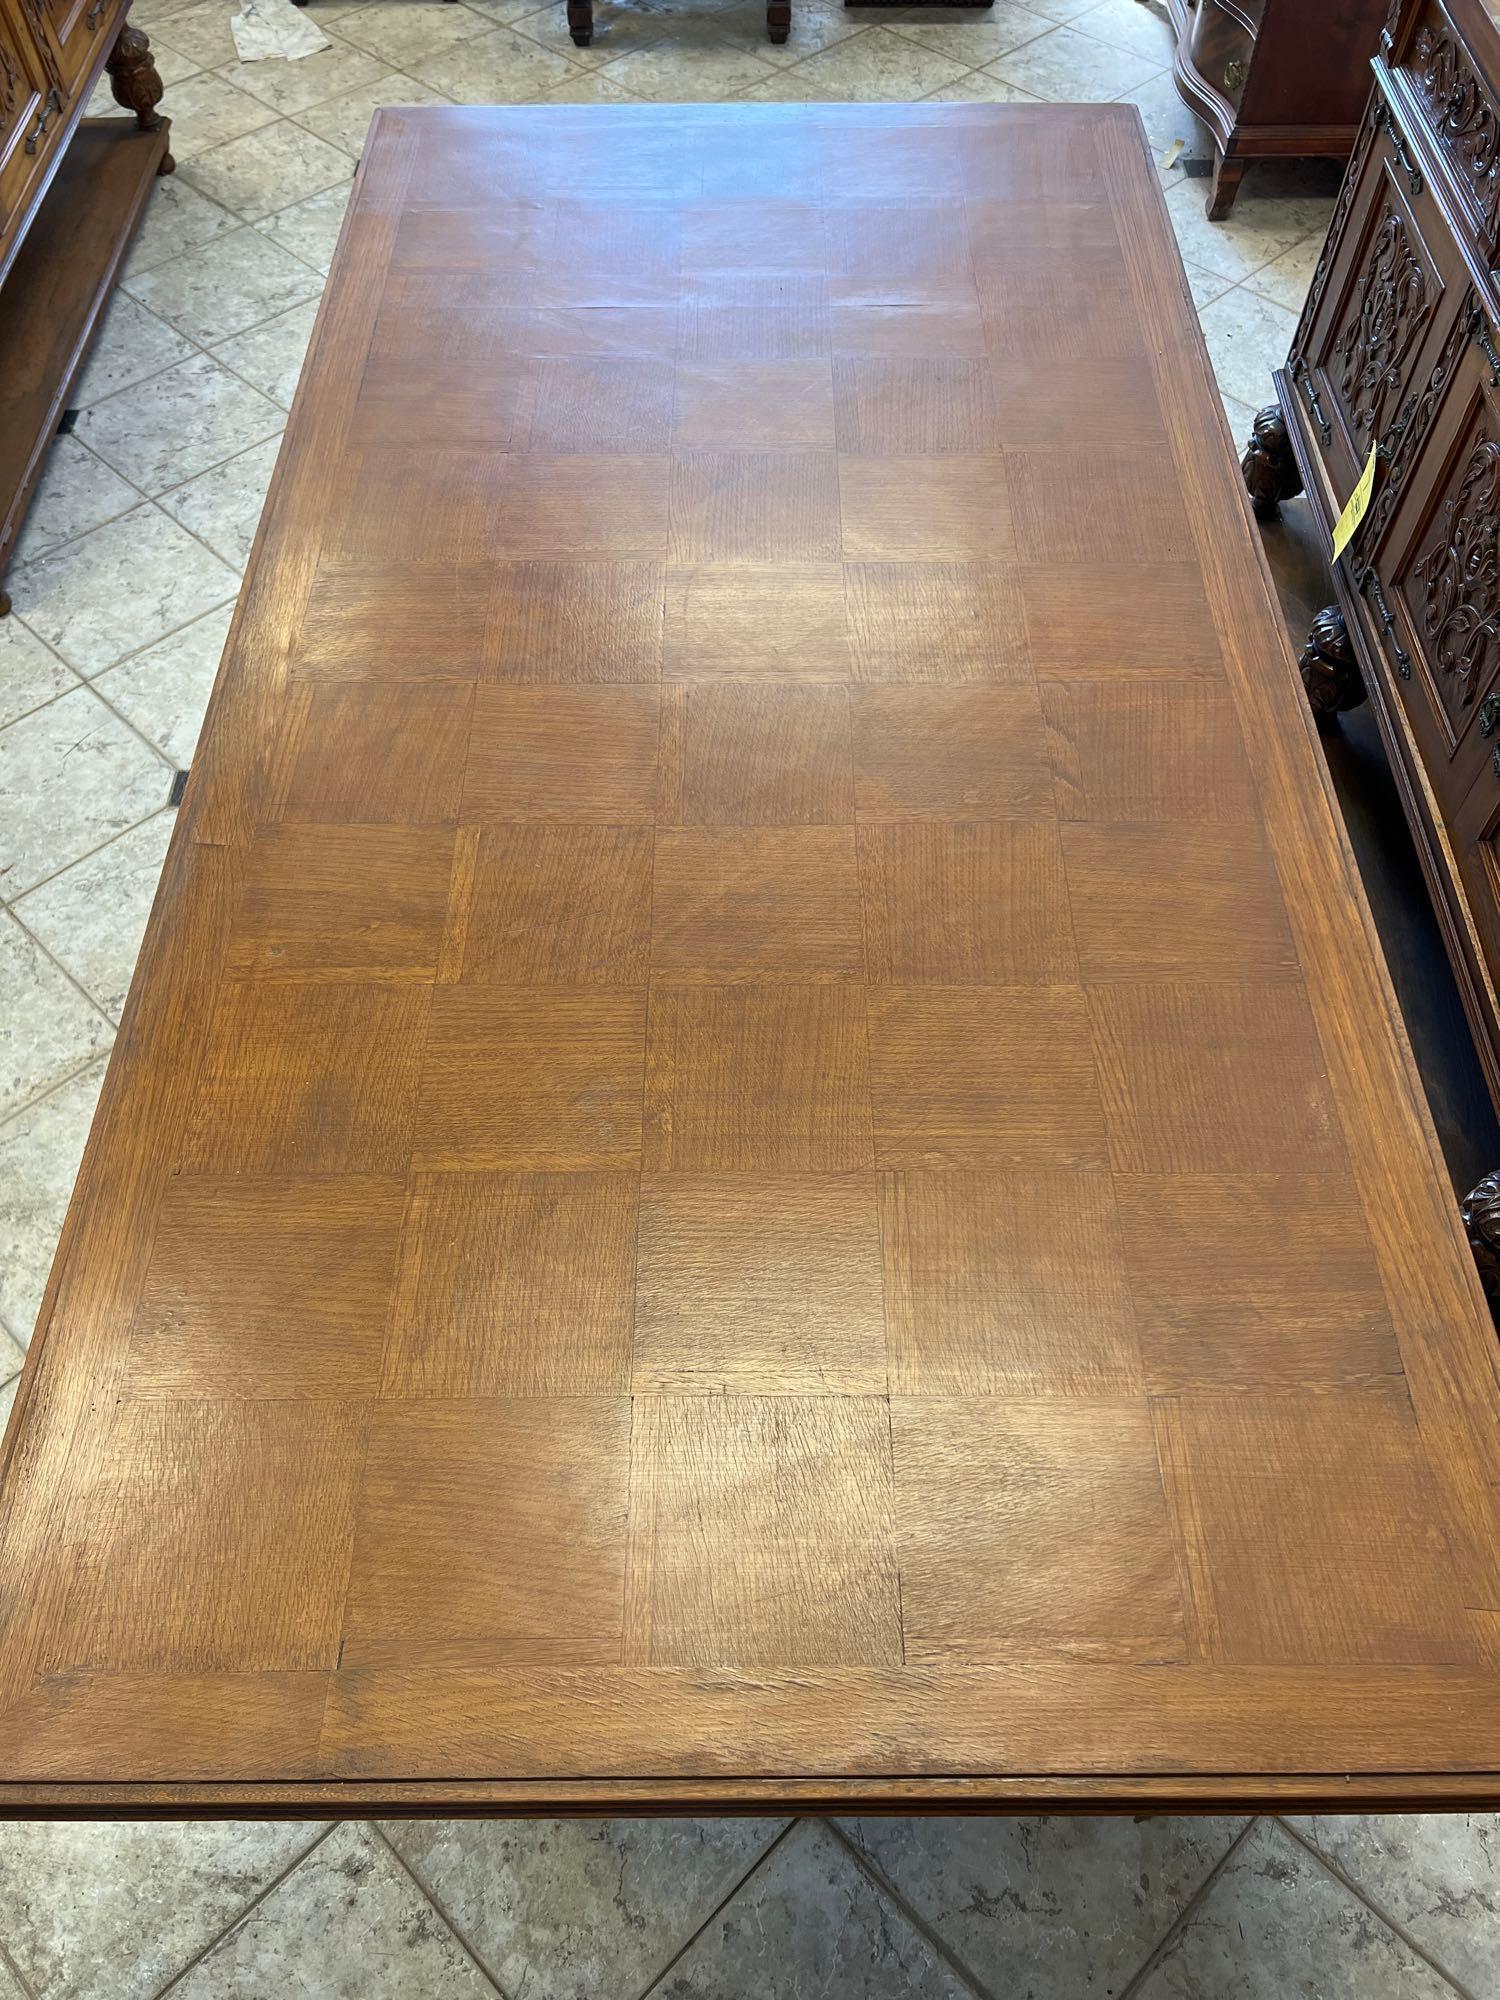 Ornate 1940s Mexican Walnut Dining Room Table